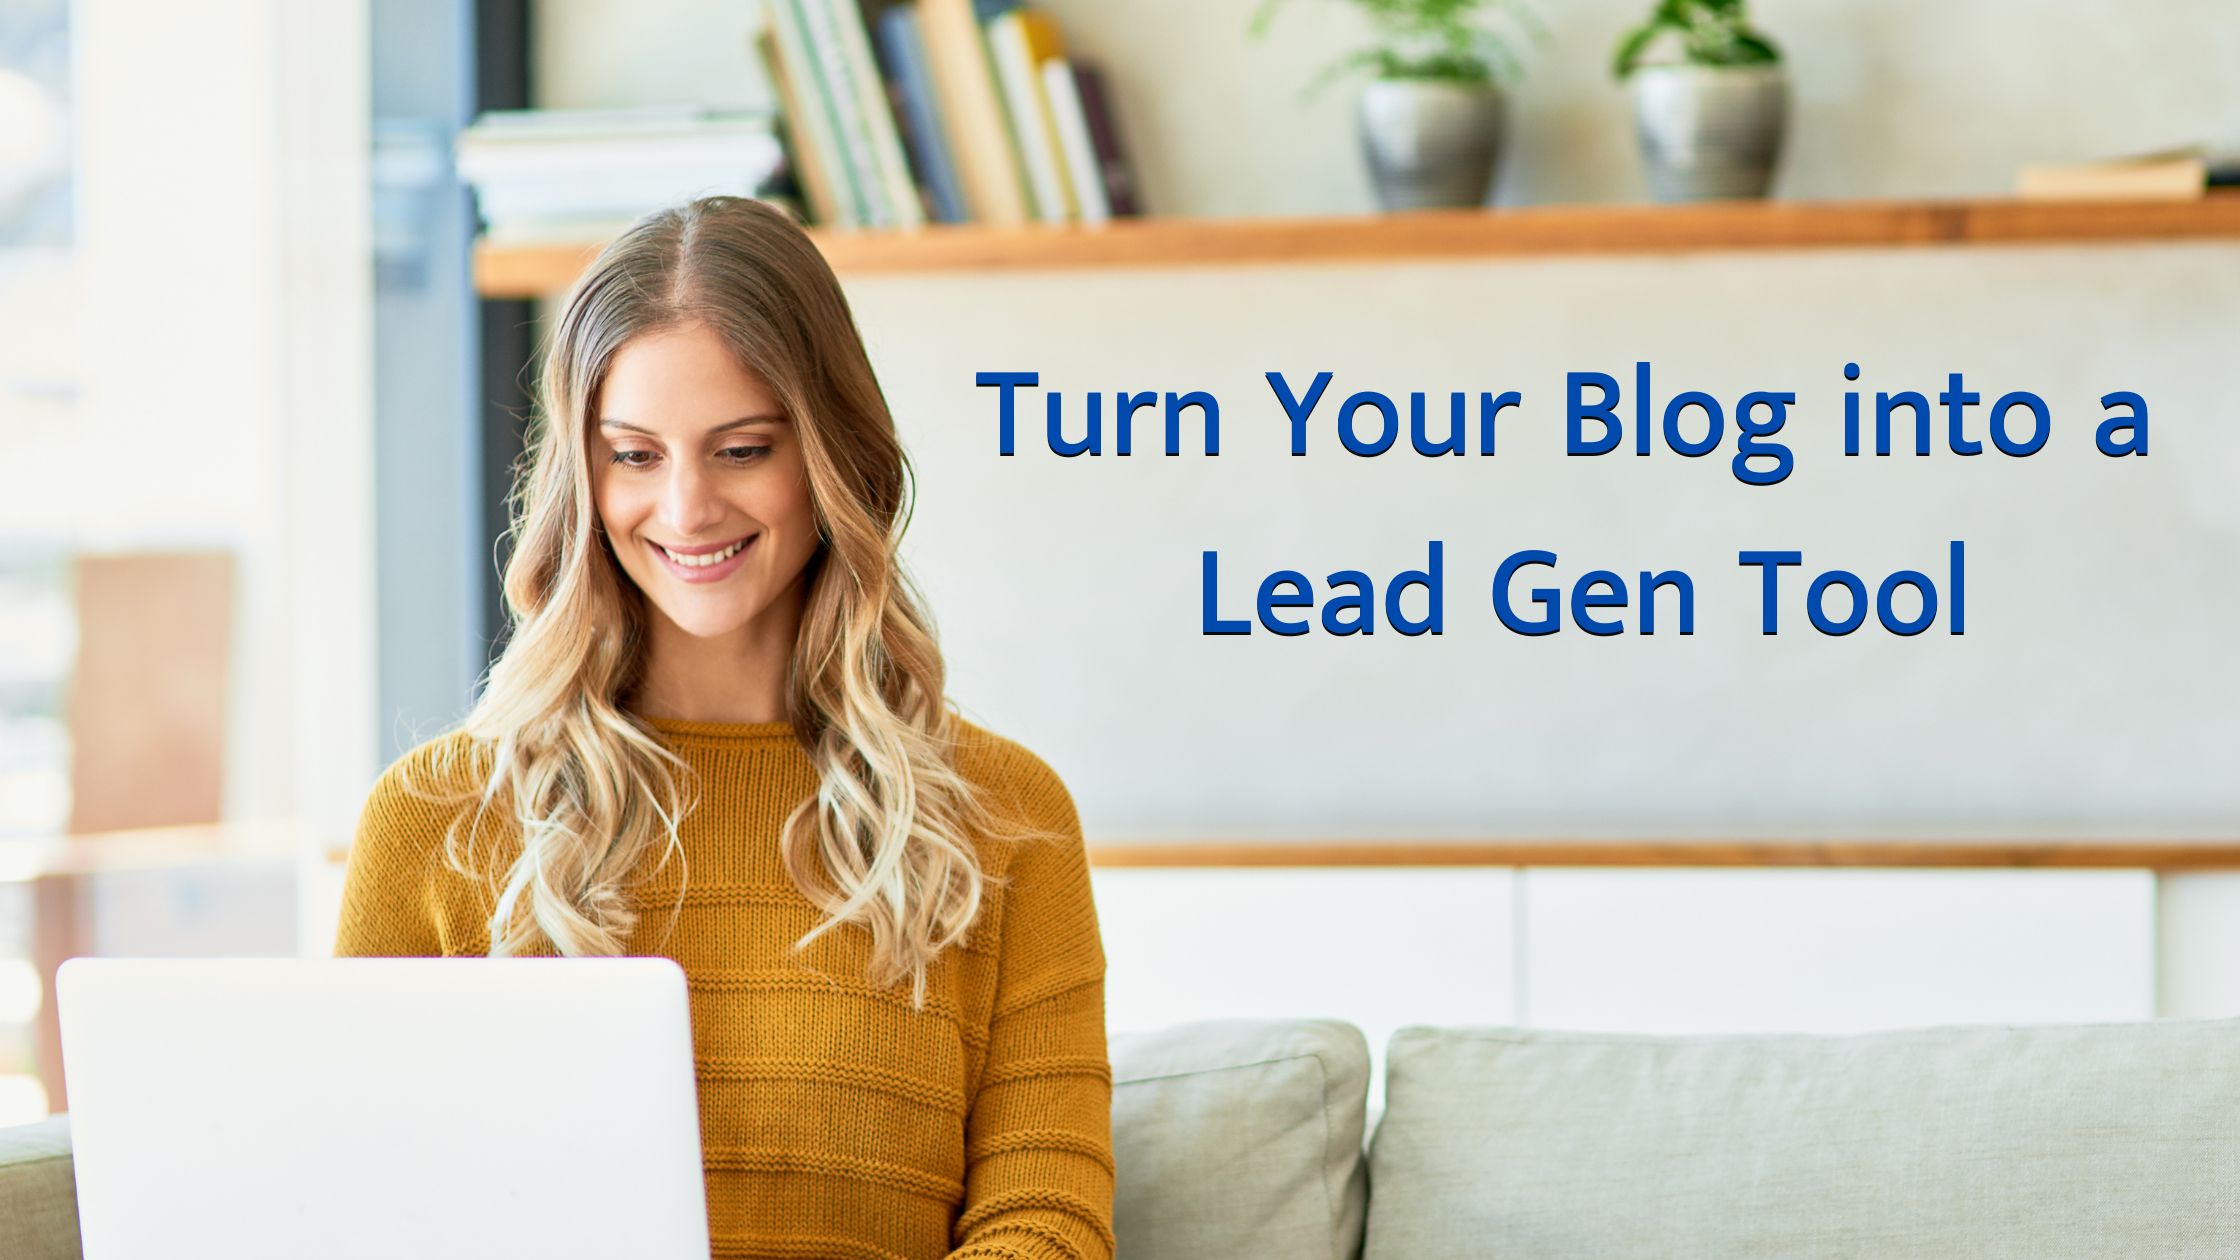 How can we use our blogs into a lead generation tool?